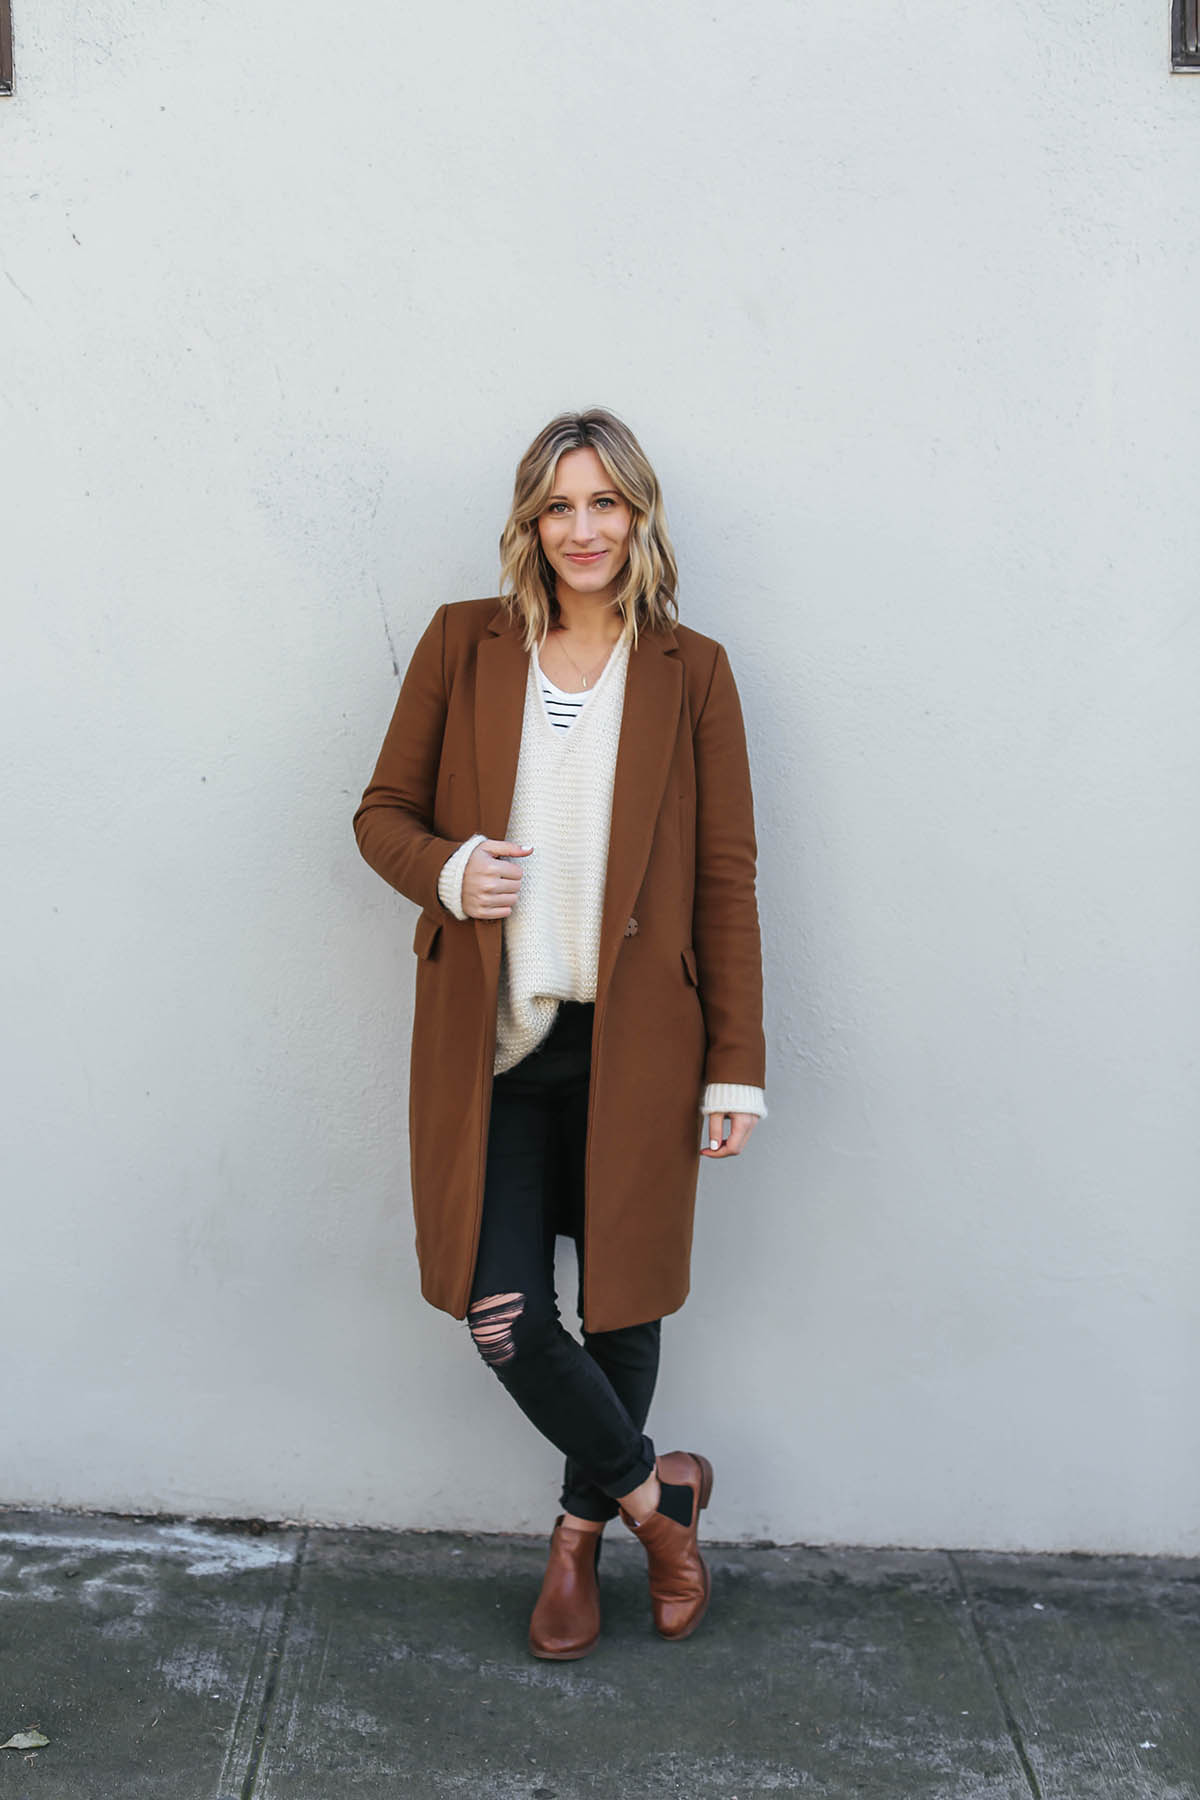 How To Layer Your Outfits For Fall